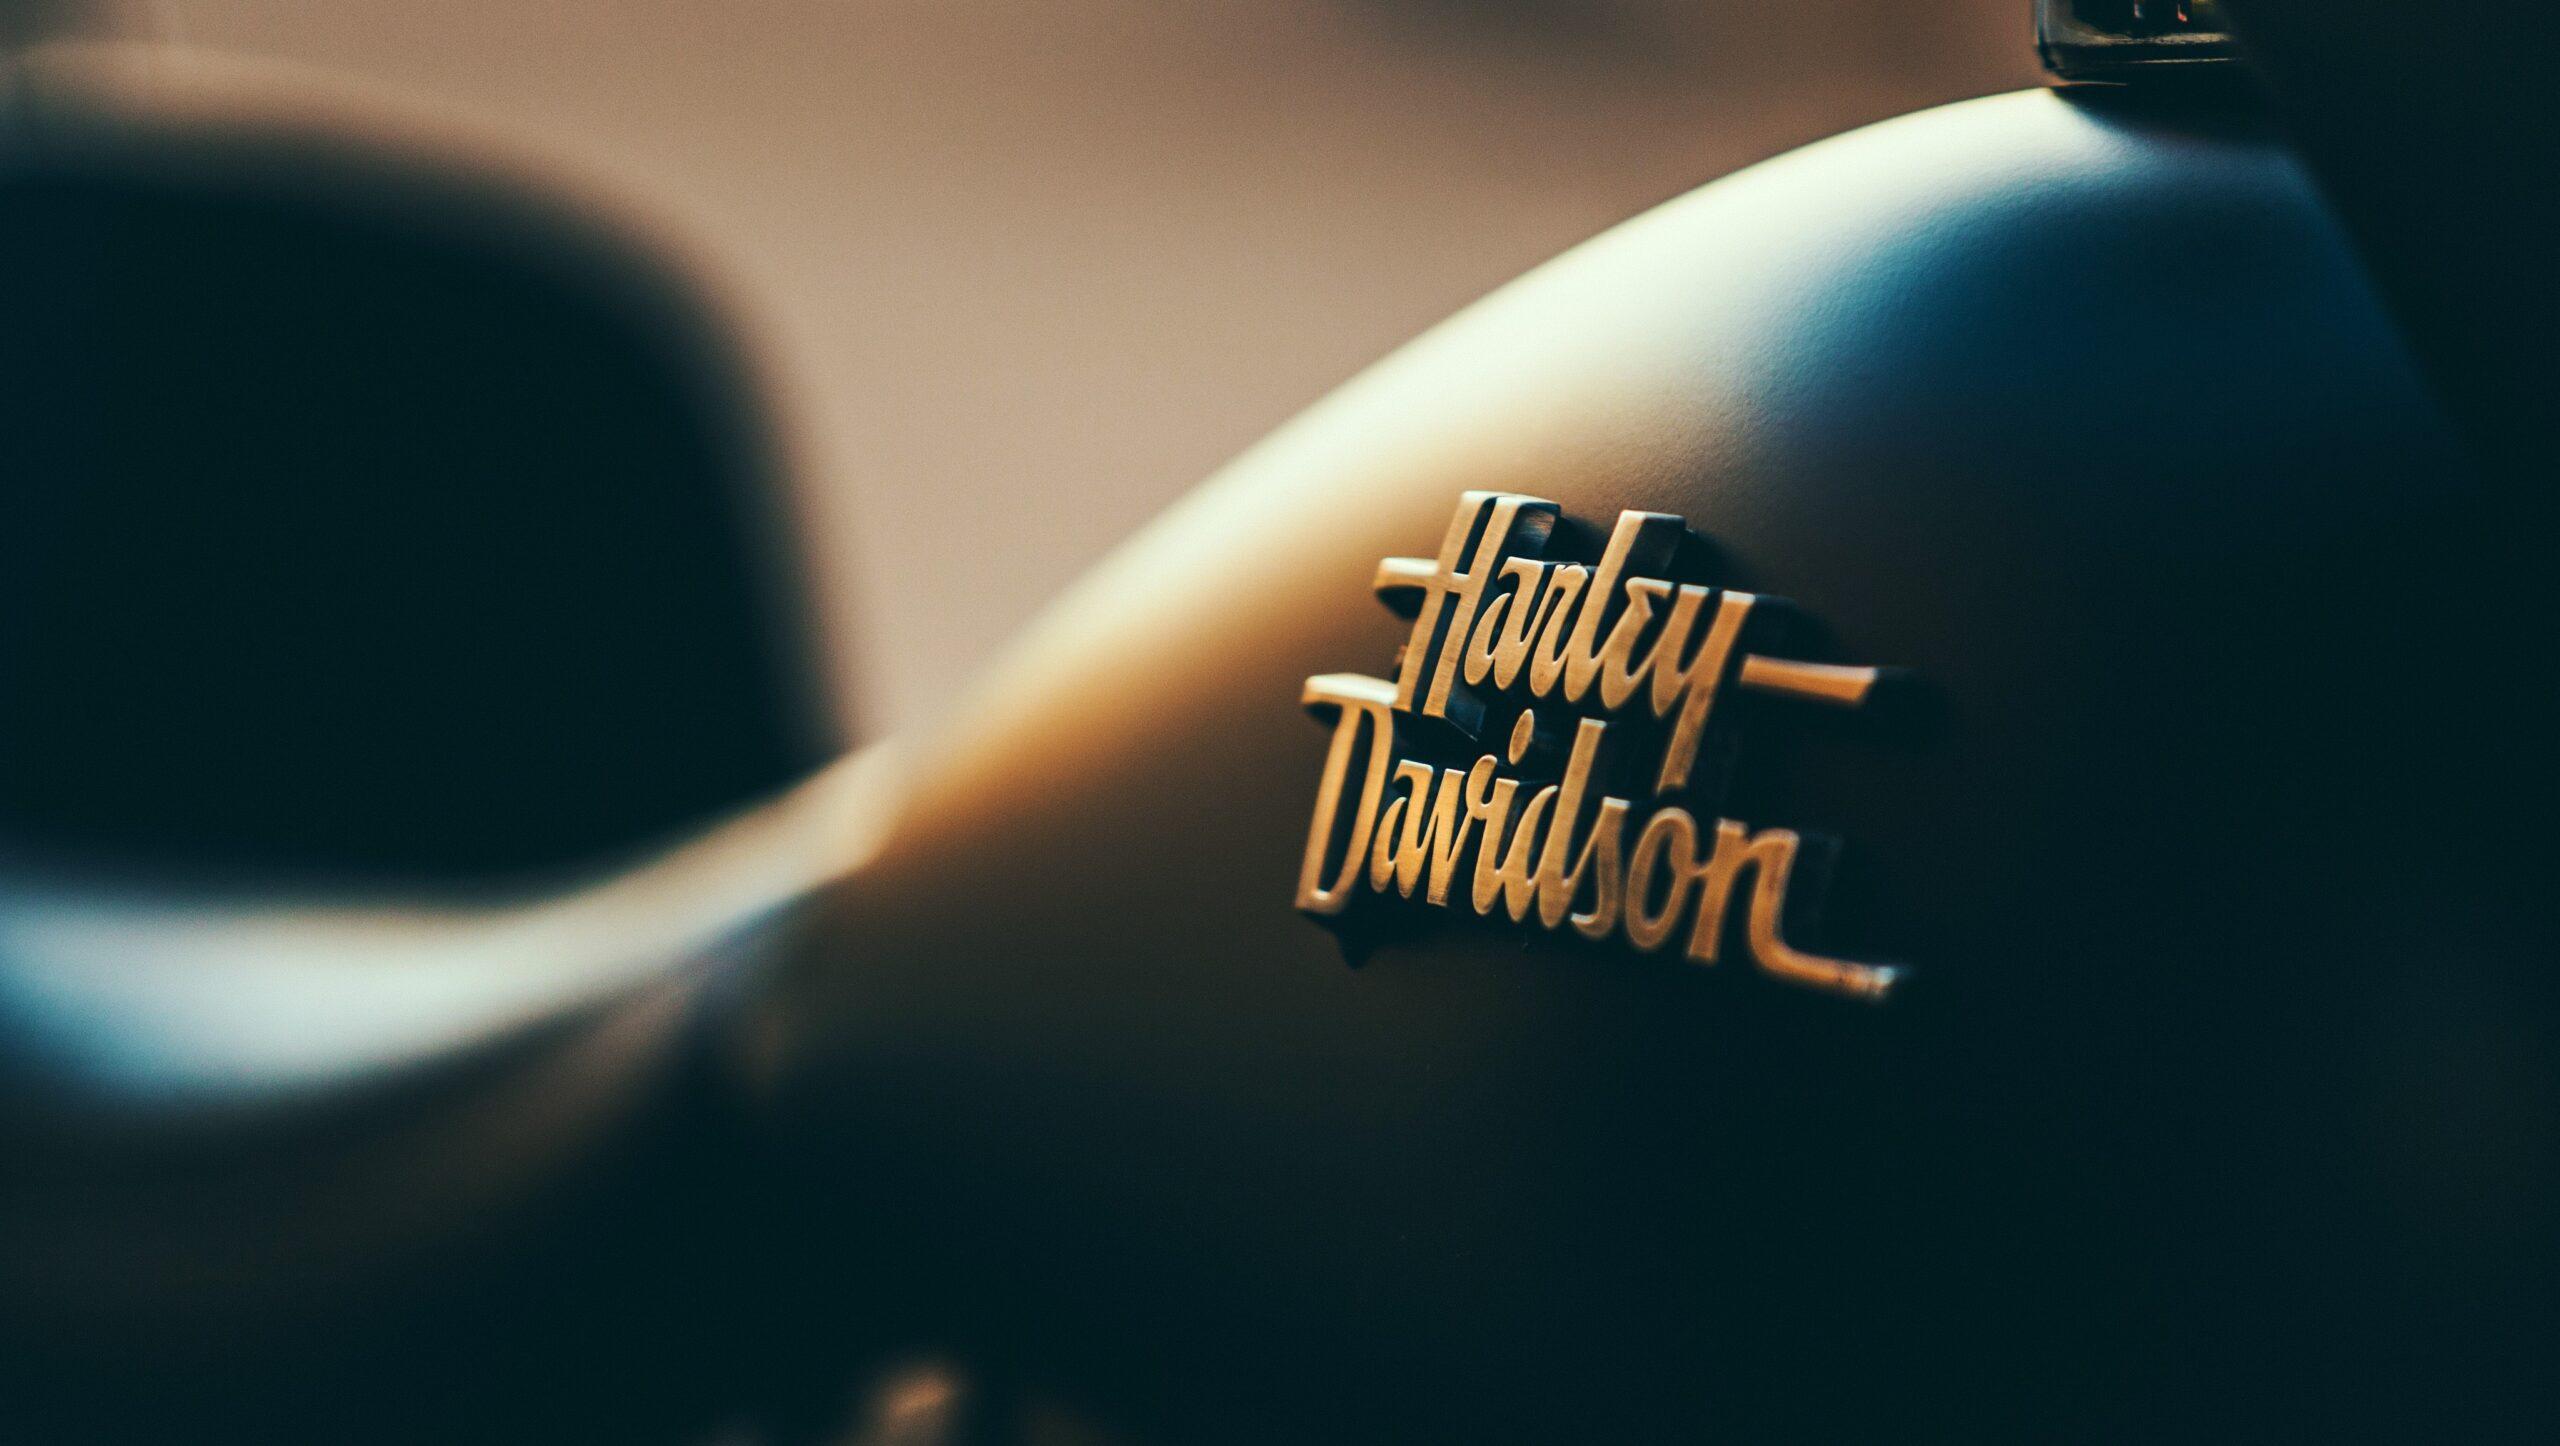 Close up of a Harley Davidson motorcycle with the brand's lettering in focus.